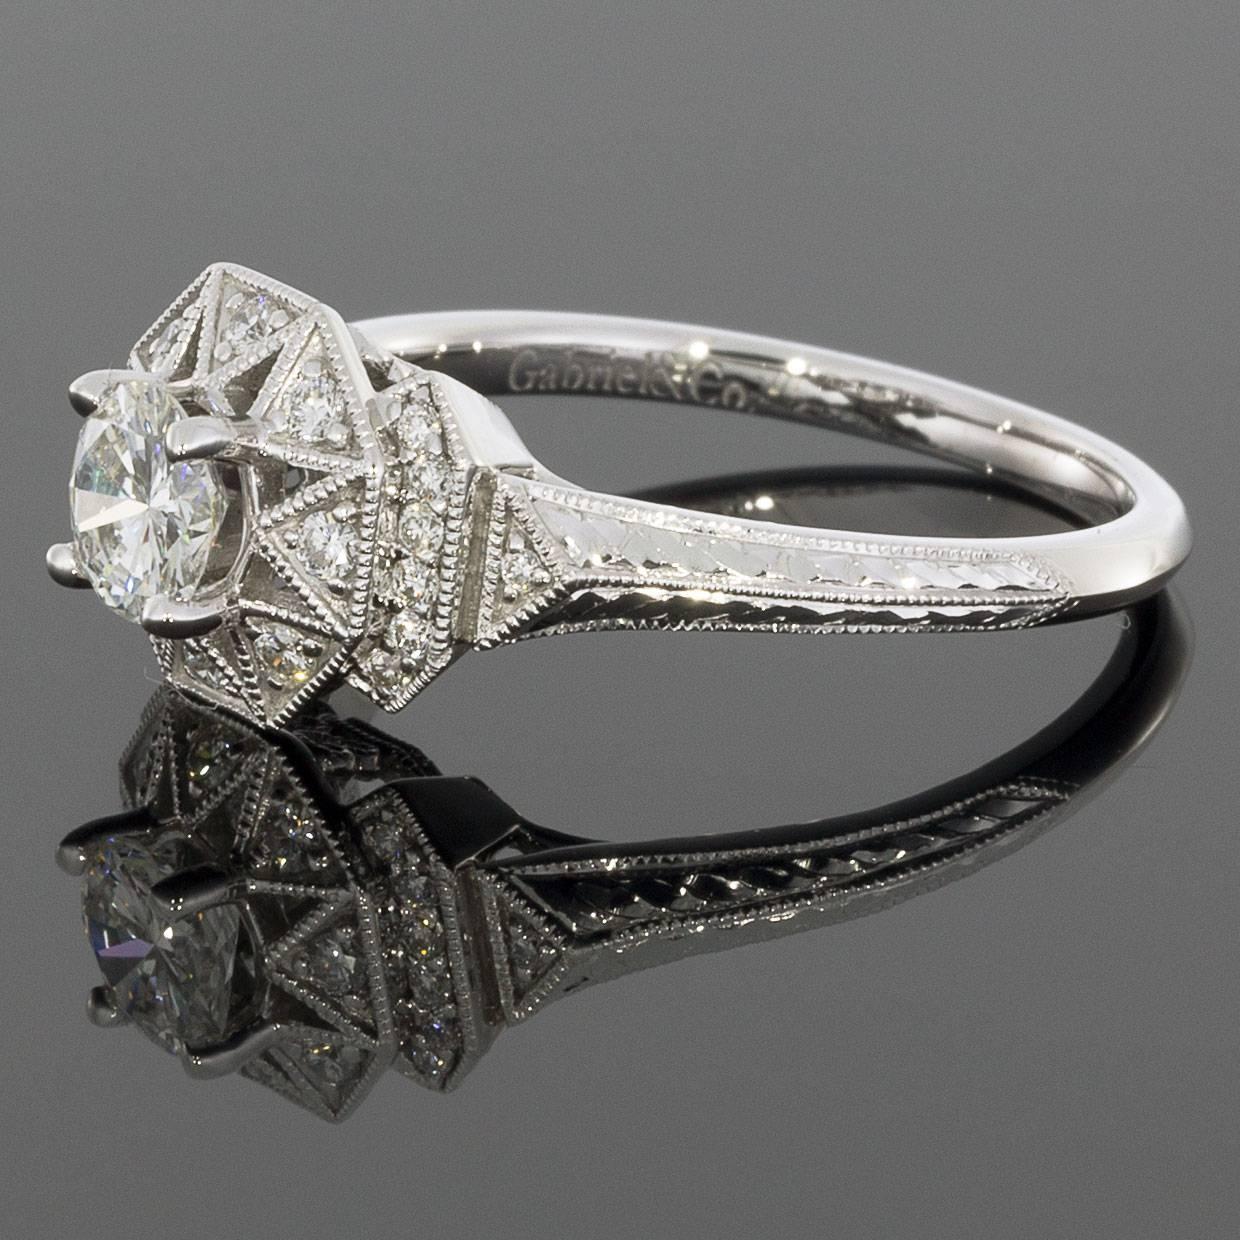 Details:
14K White Gold
0.40CT H/SI1 center diamond
MSRP $3000
Comes in a beautiful presentation box
An adult signature will be required for delivery unless other arrangements are made prior to purchasing